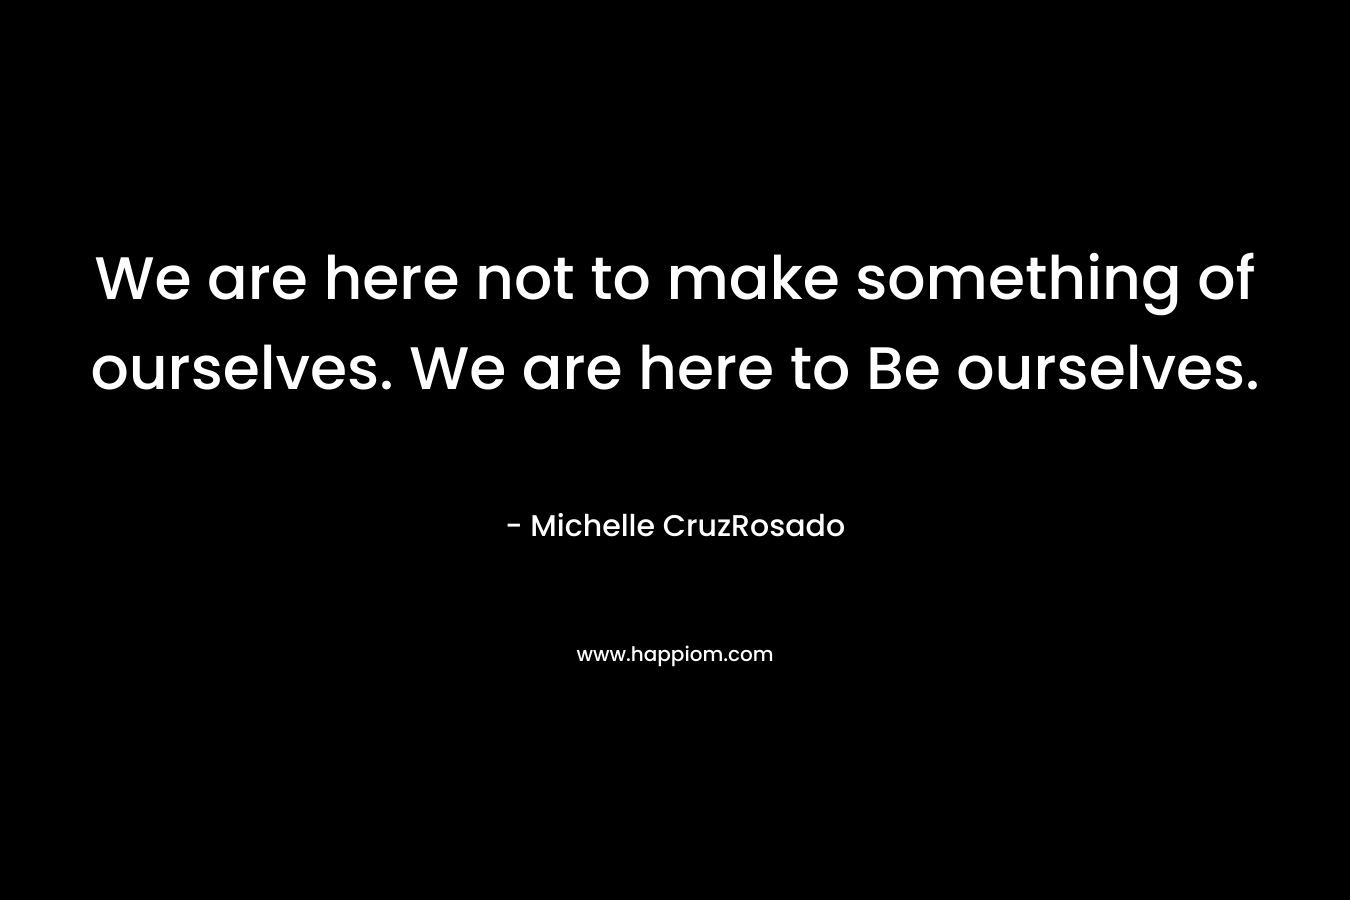 We are here not to make something of ourselves. We are here to Be ourselves. – Michelle CruzRosado